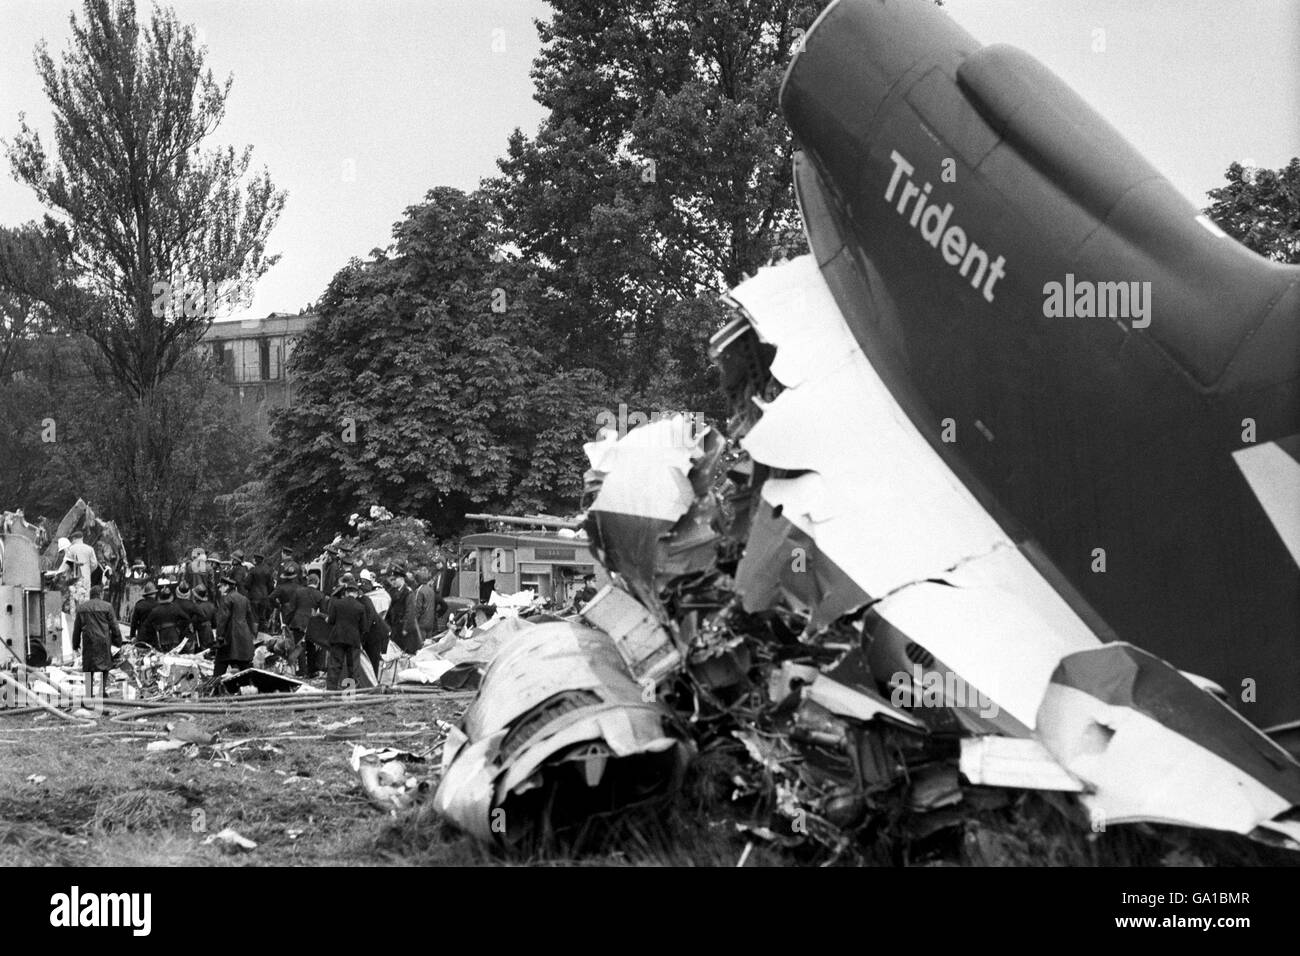 The wreckage of the Brussels bound BEA Trident jet which crashed in a field, killing 118. Stock Photo